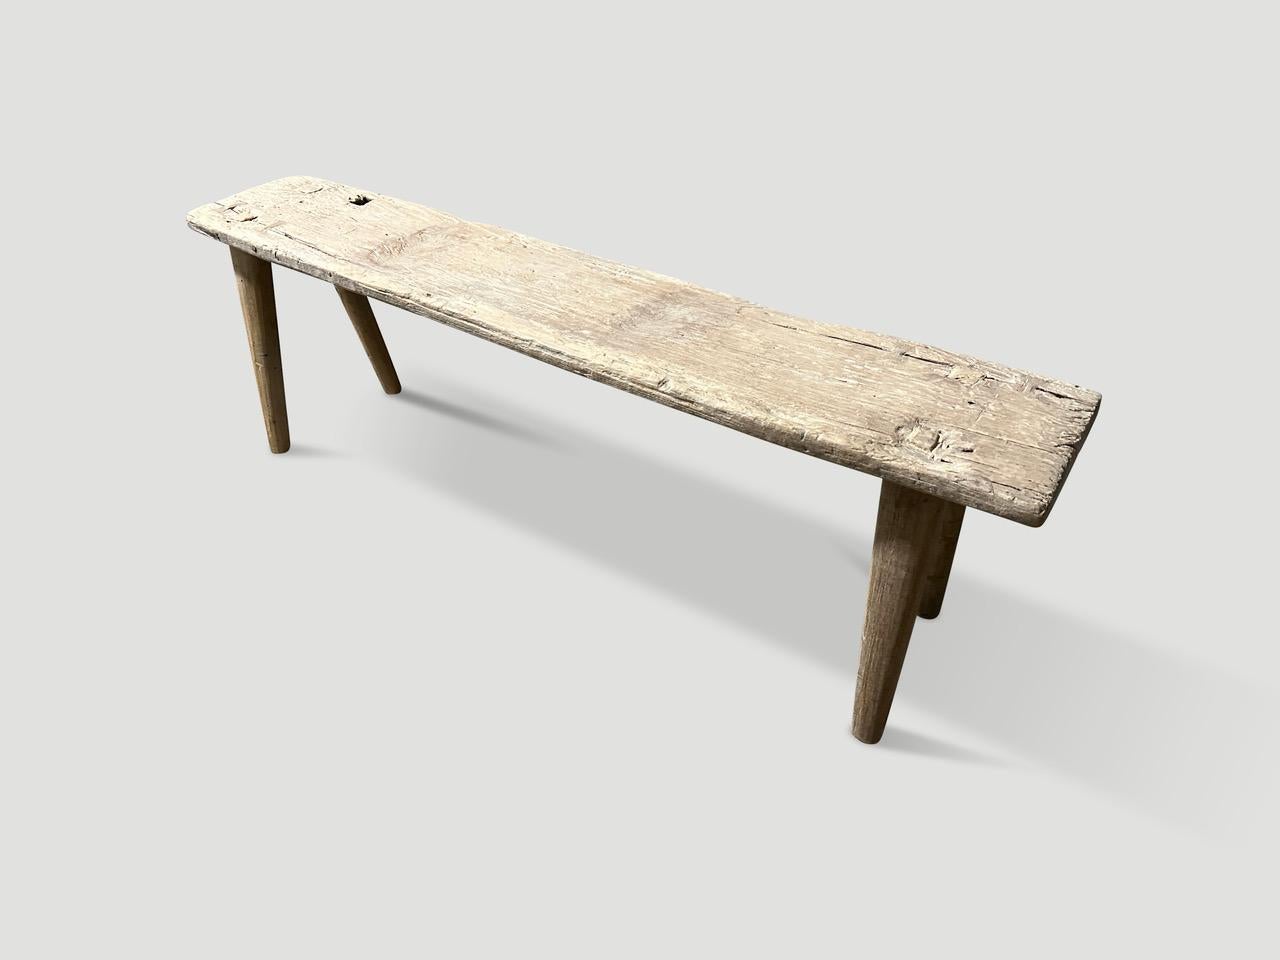 Andrianna Shamaris Antique Bleached Teak Wood Bench In Excellent Condition For Sale In New York, NY